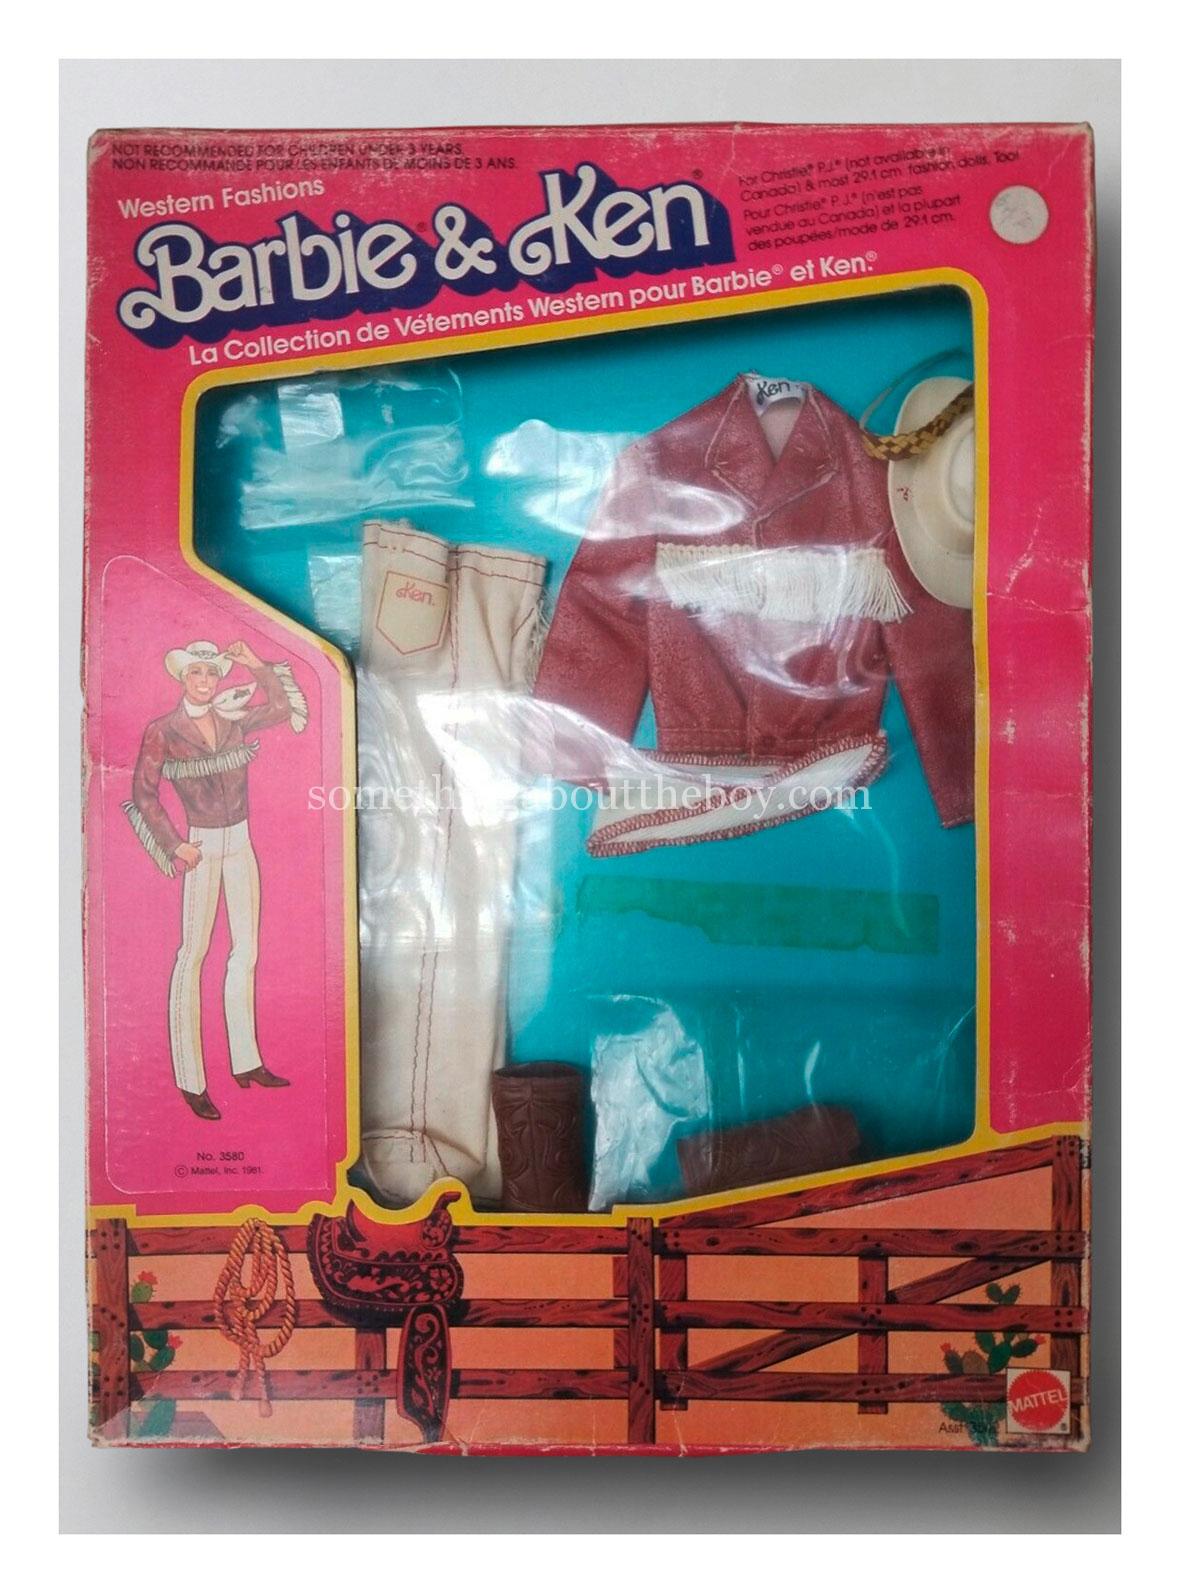 1982 Western Fashions #3580 in Canadian/European packaging